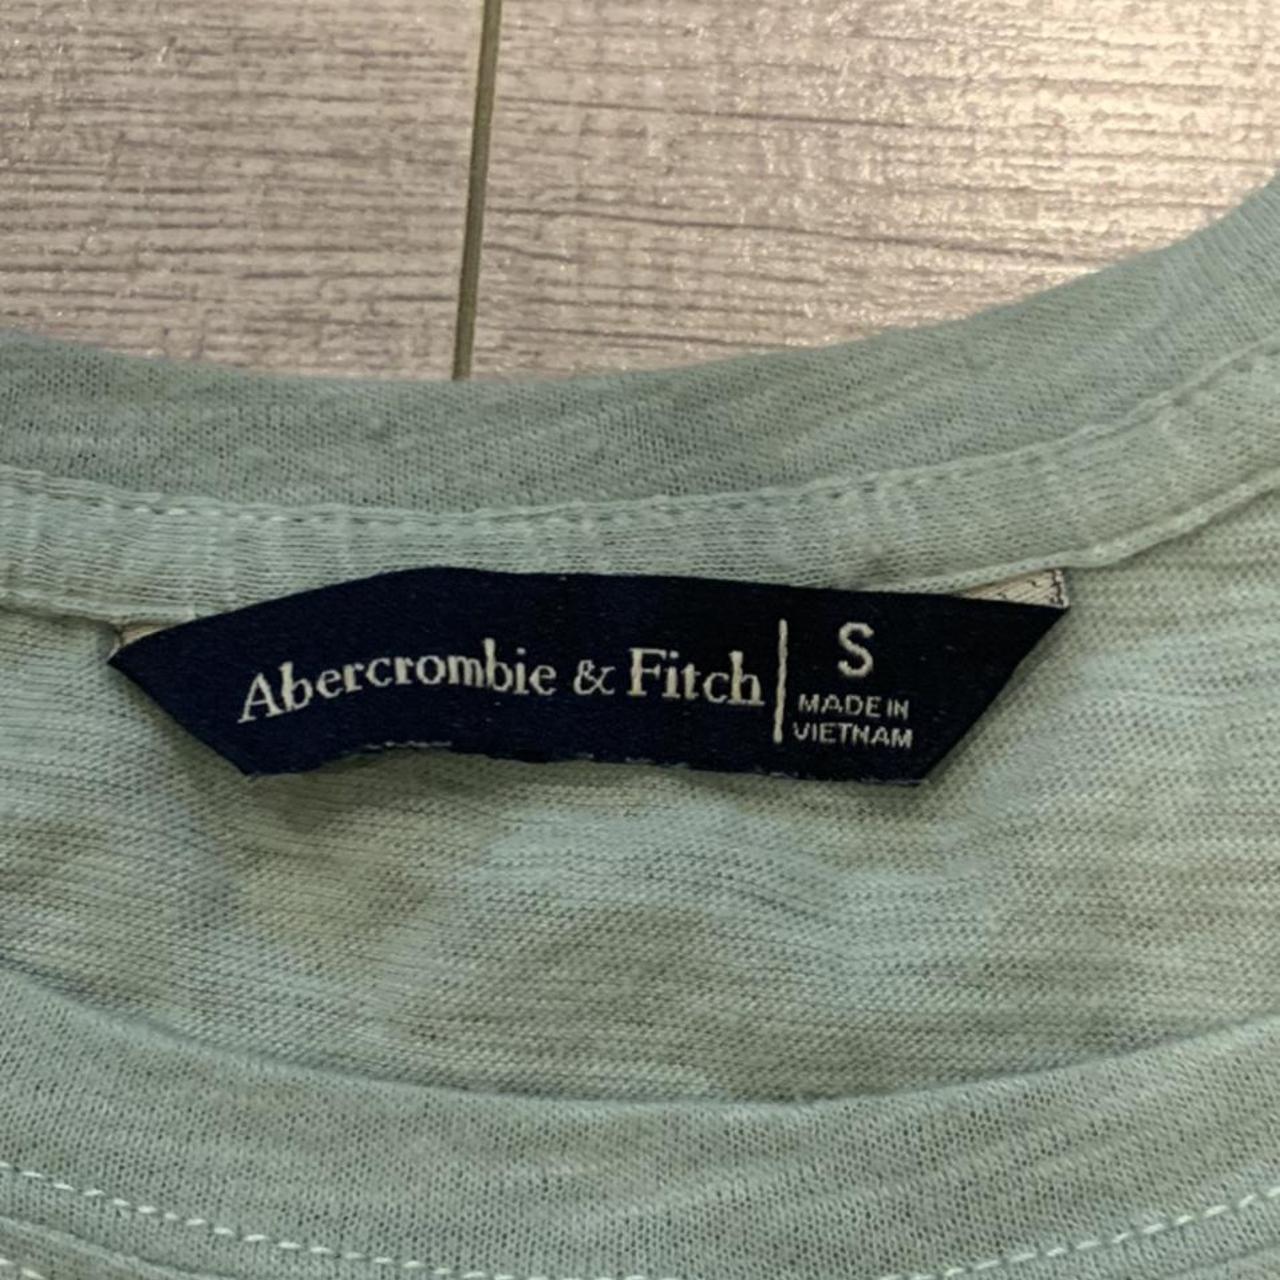 Abercrombie & Fitch Women's Green and Pink T-shirt | Depop